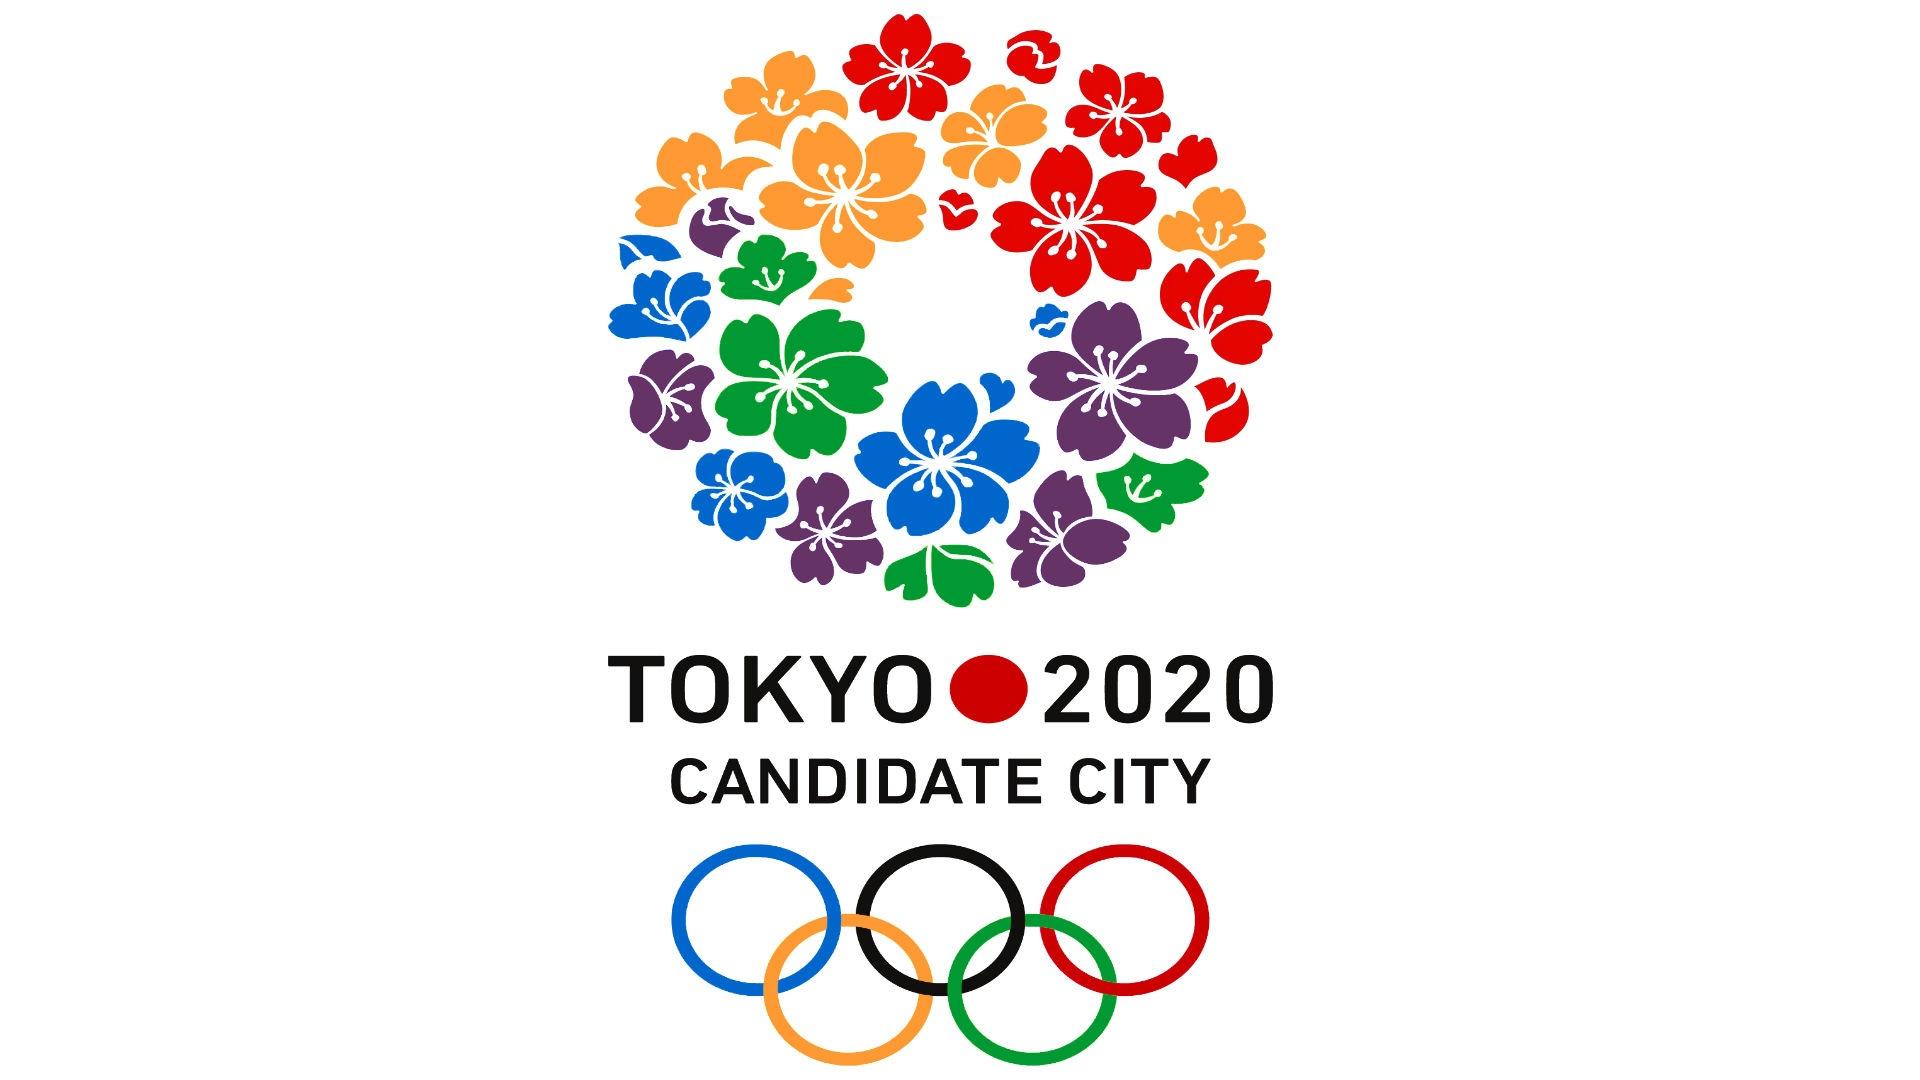 Tokyo Candidate City 2020 Olympics Wallpaper